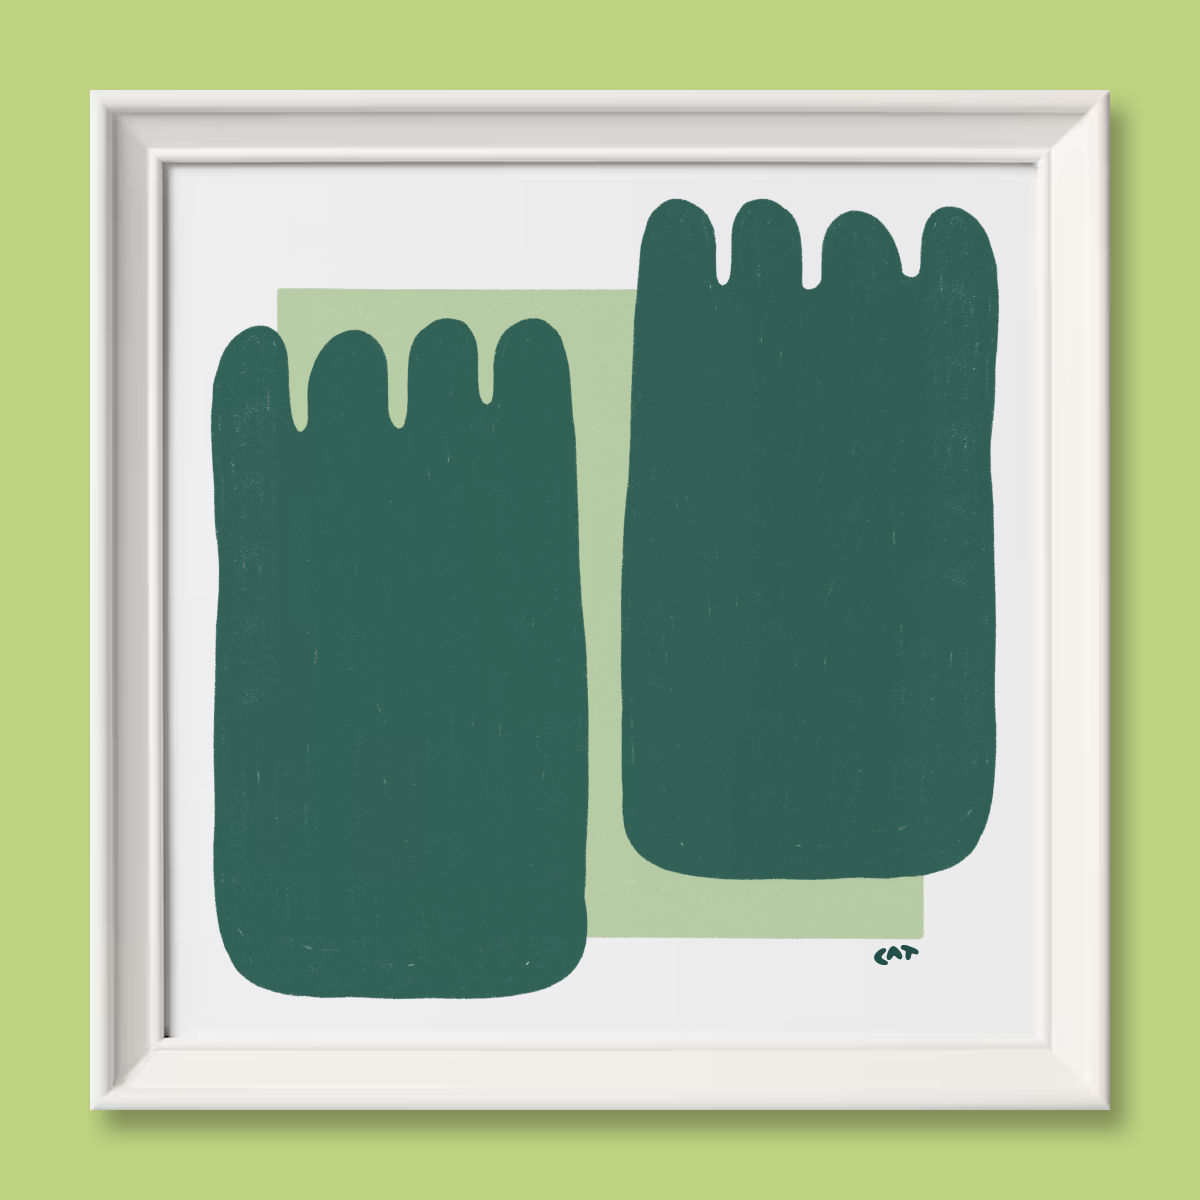 White framed print of a mint square with two dark green squid or feet shapes on top.